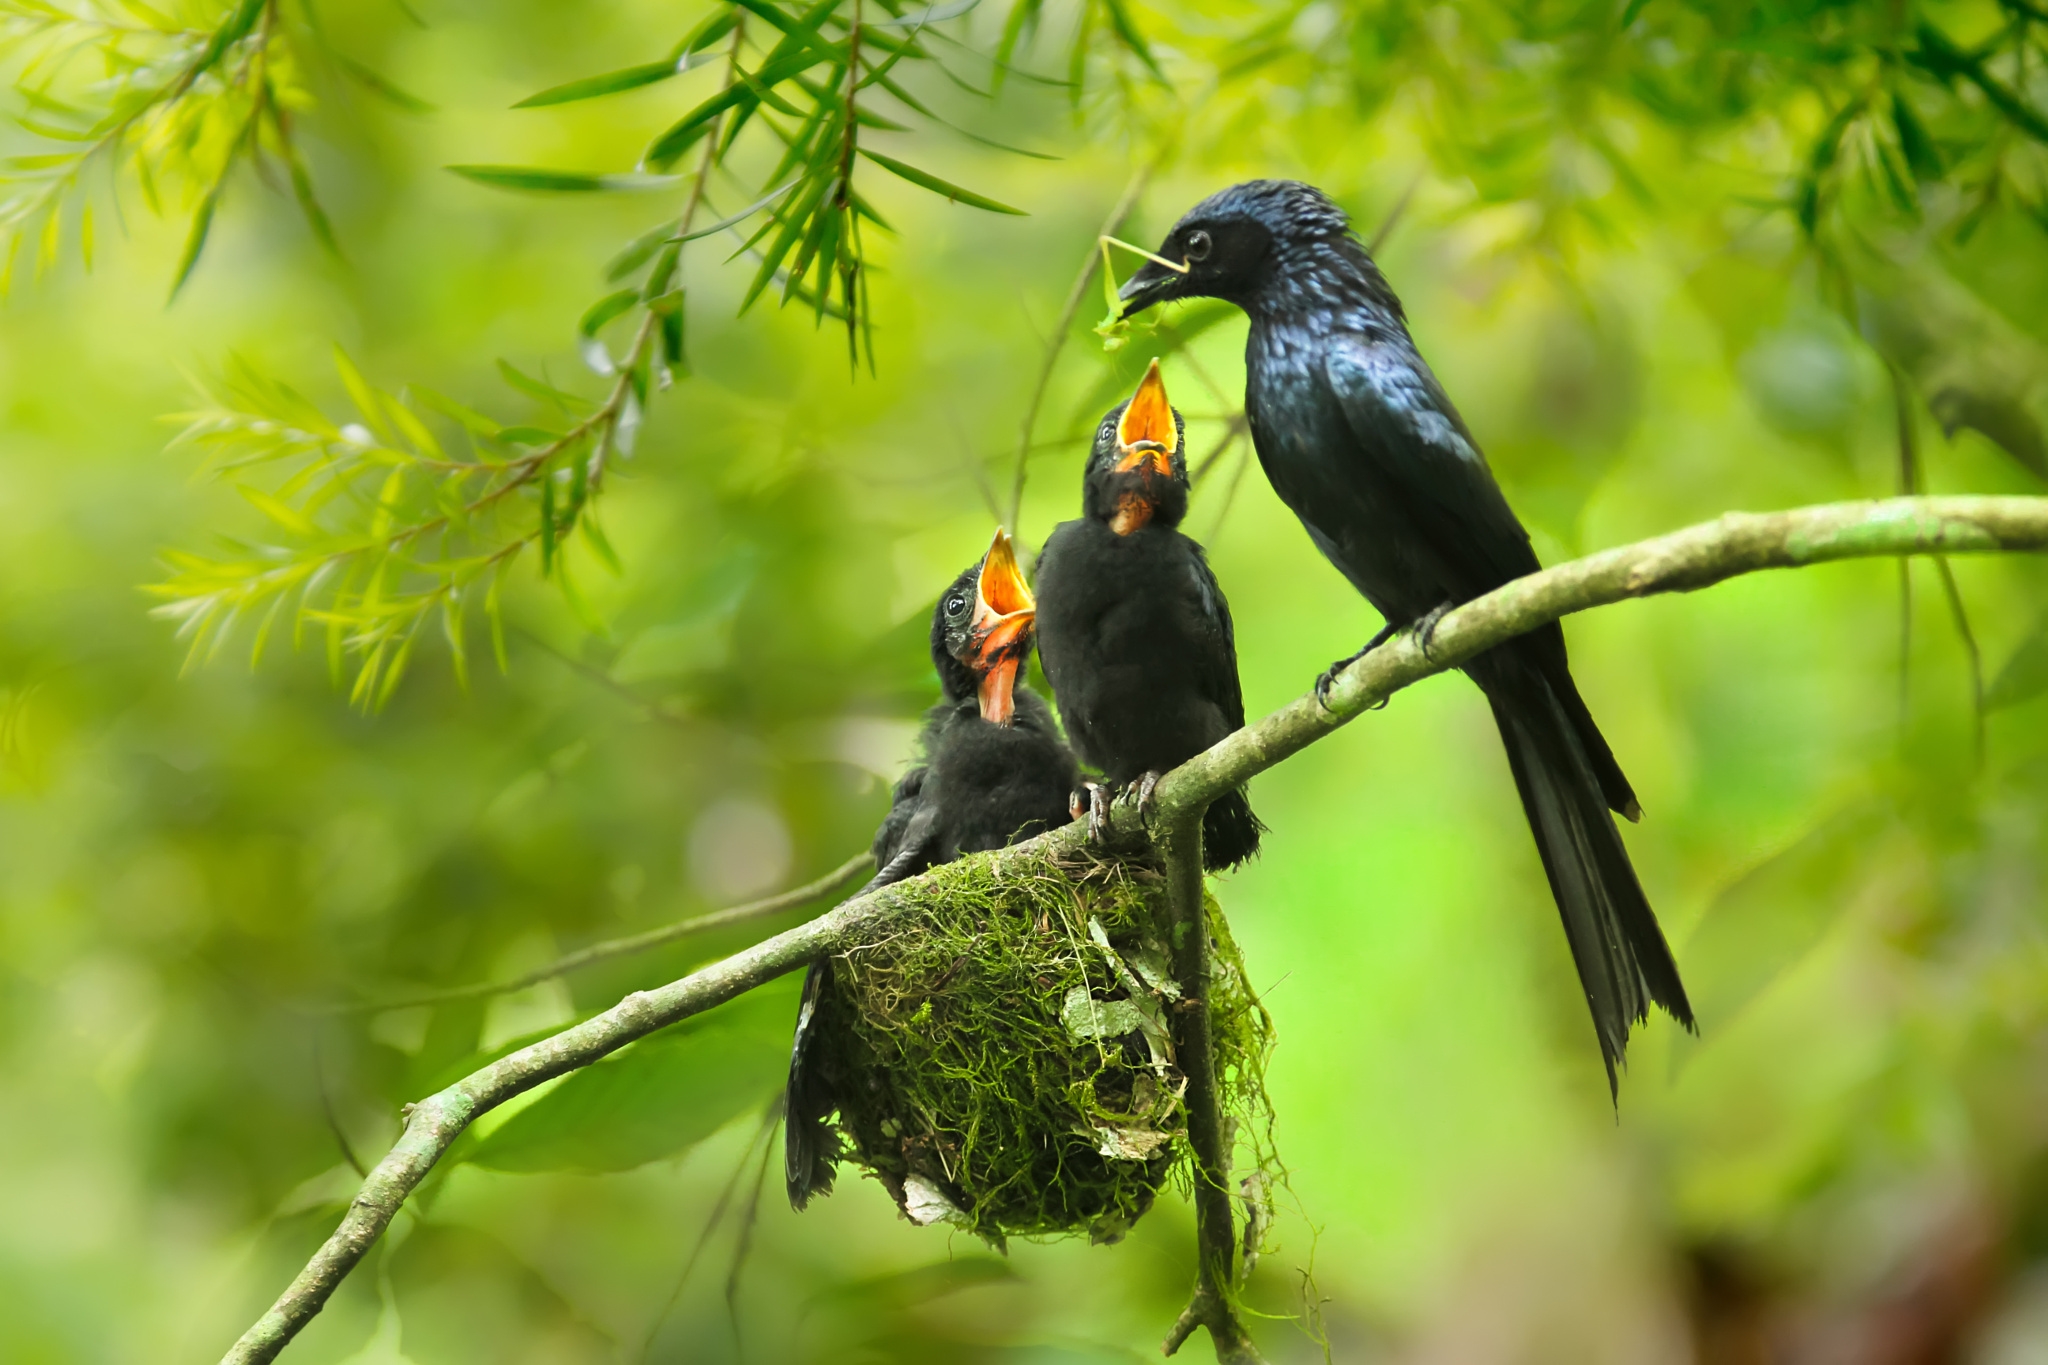 Small Black Bird Feeding her Young HD Wallpaper. Background Image